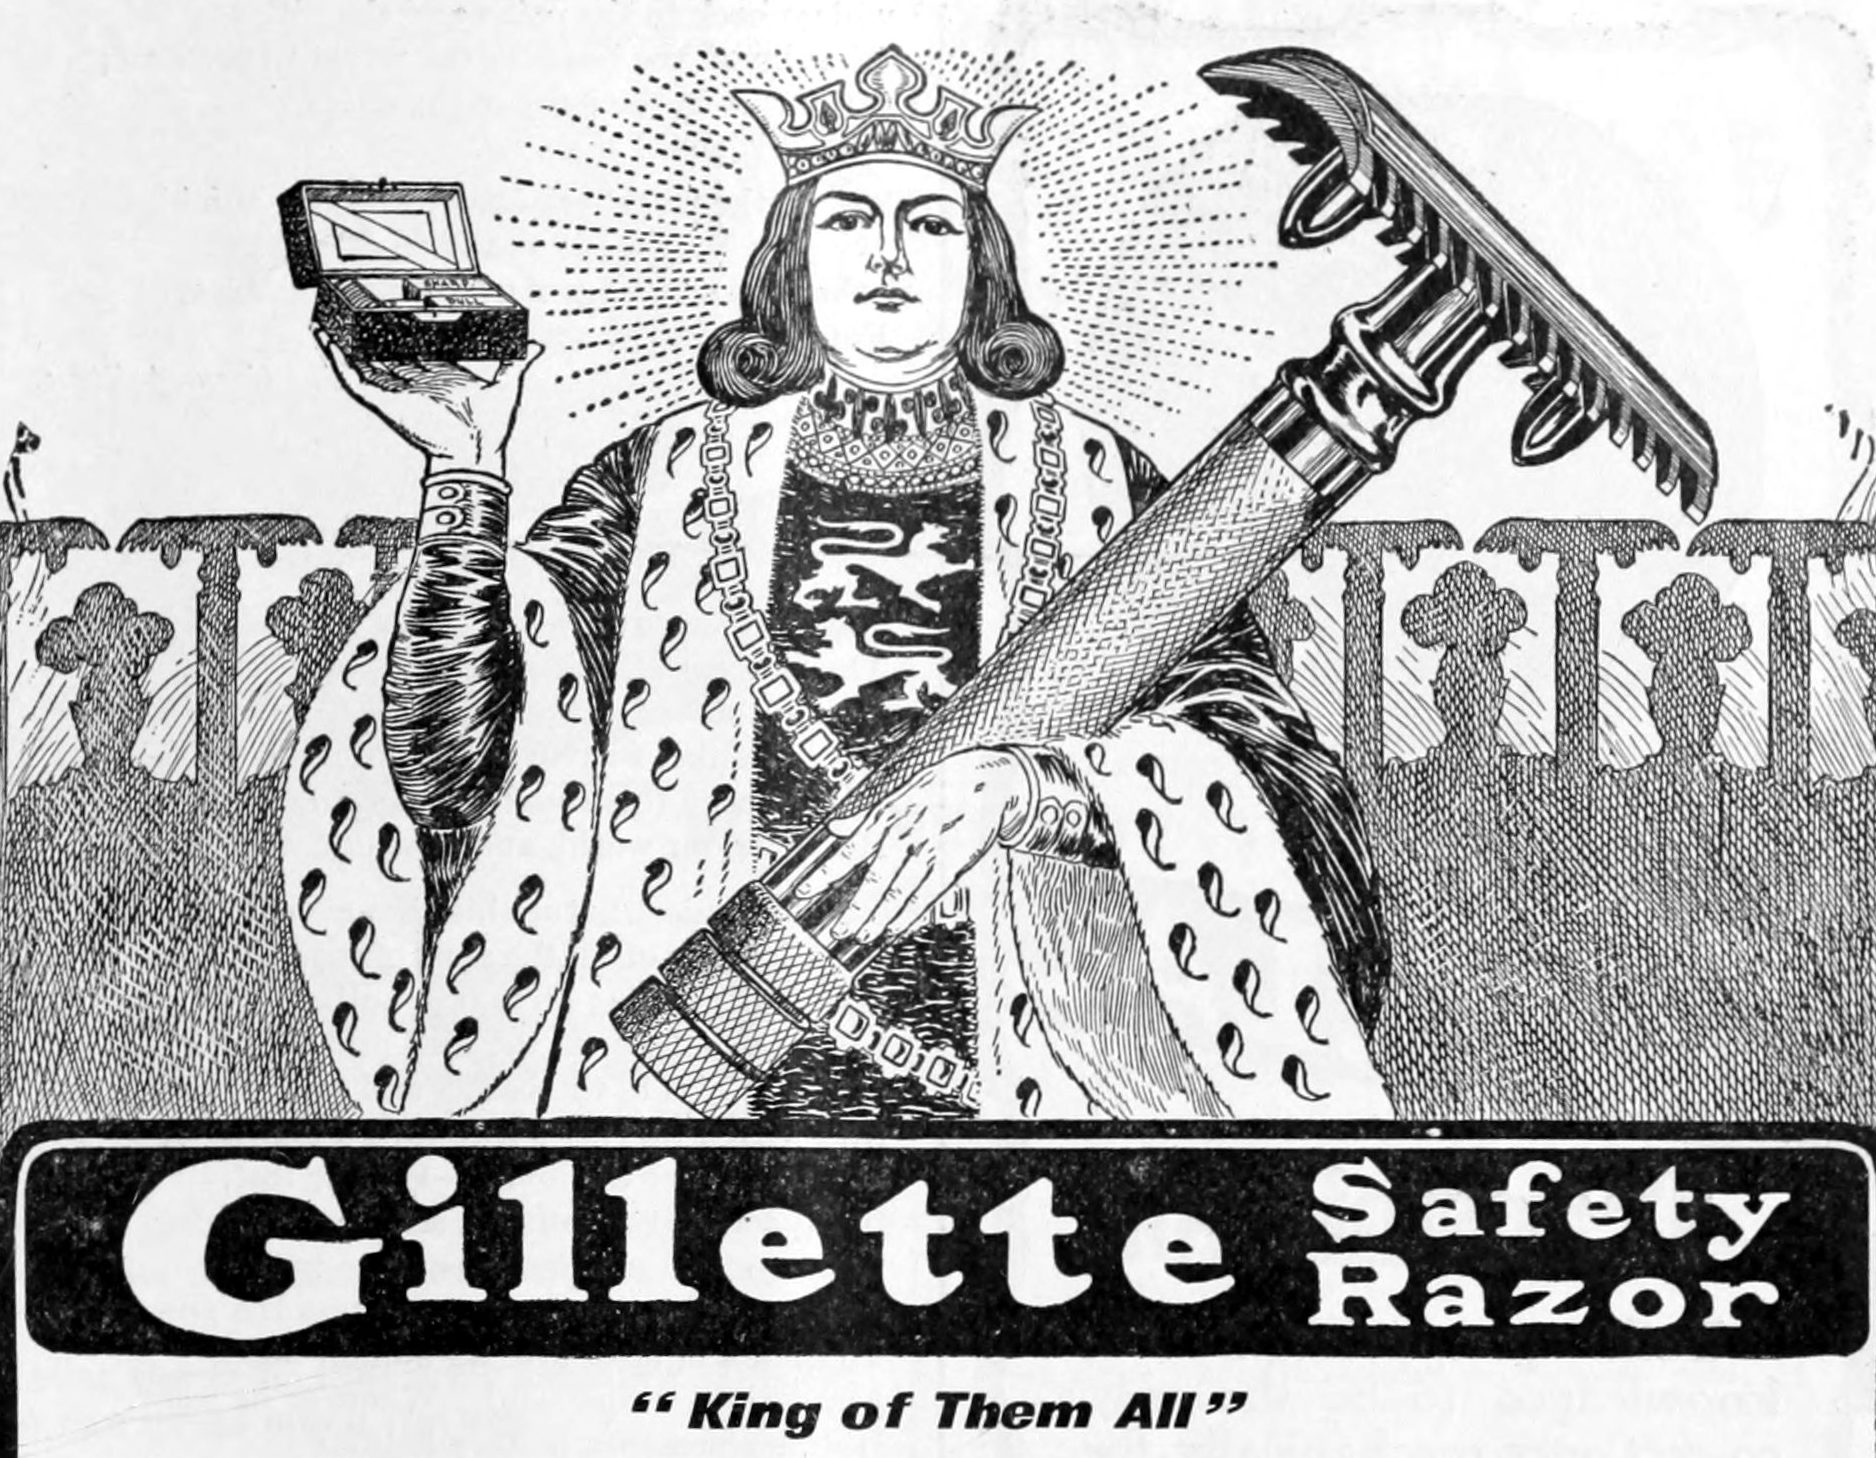 A drawing of a king holding an old-fashioned safety razor with the message "Gillette Safety Razor: King of Them All"